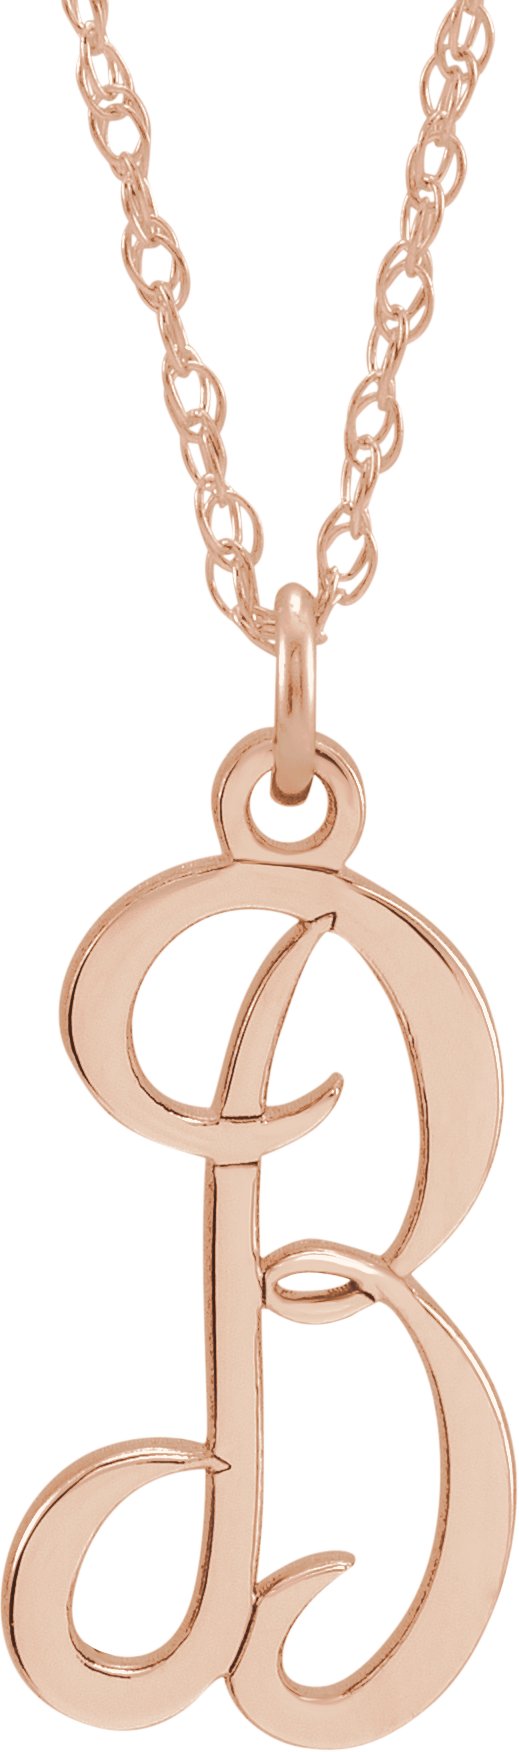 14K Rose Gold-Plated Sterling Silver Script Initial B 16-18" Necklace